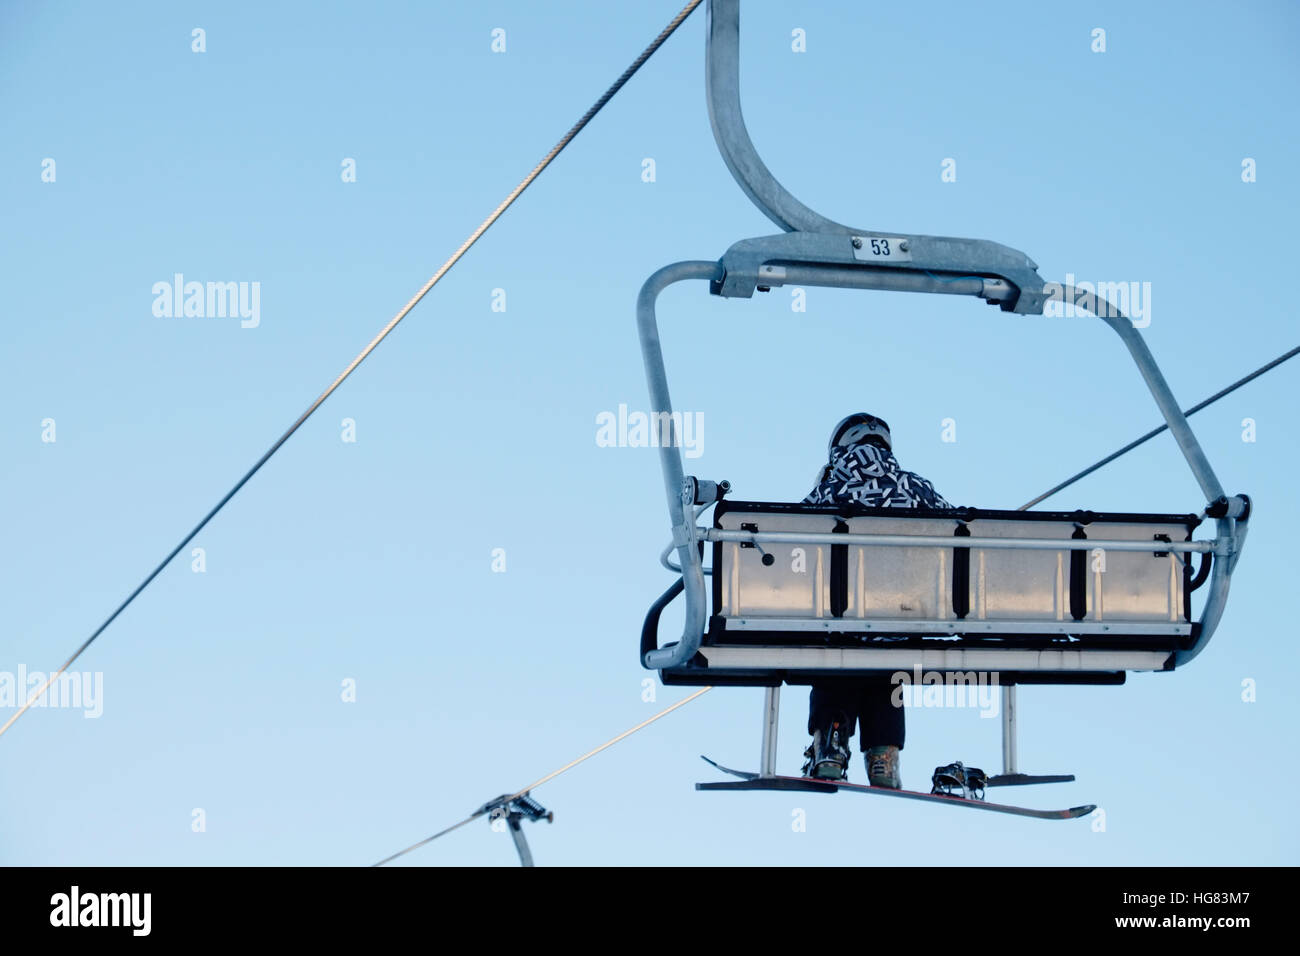 Snowboarder sitting on the chairlift Stock Photo